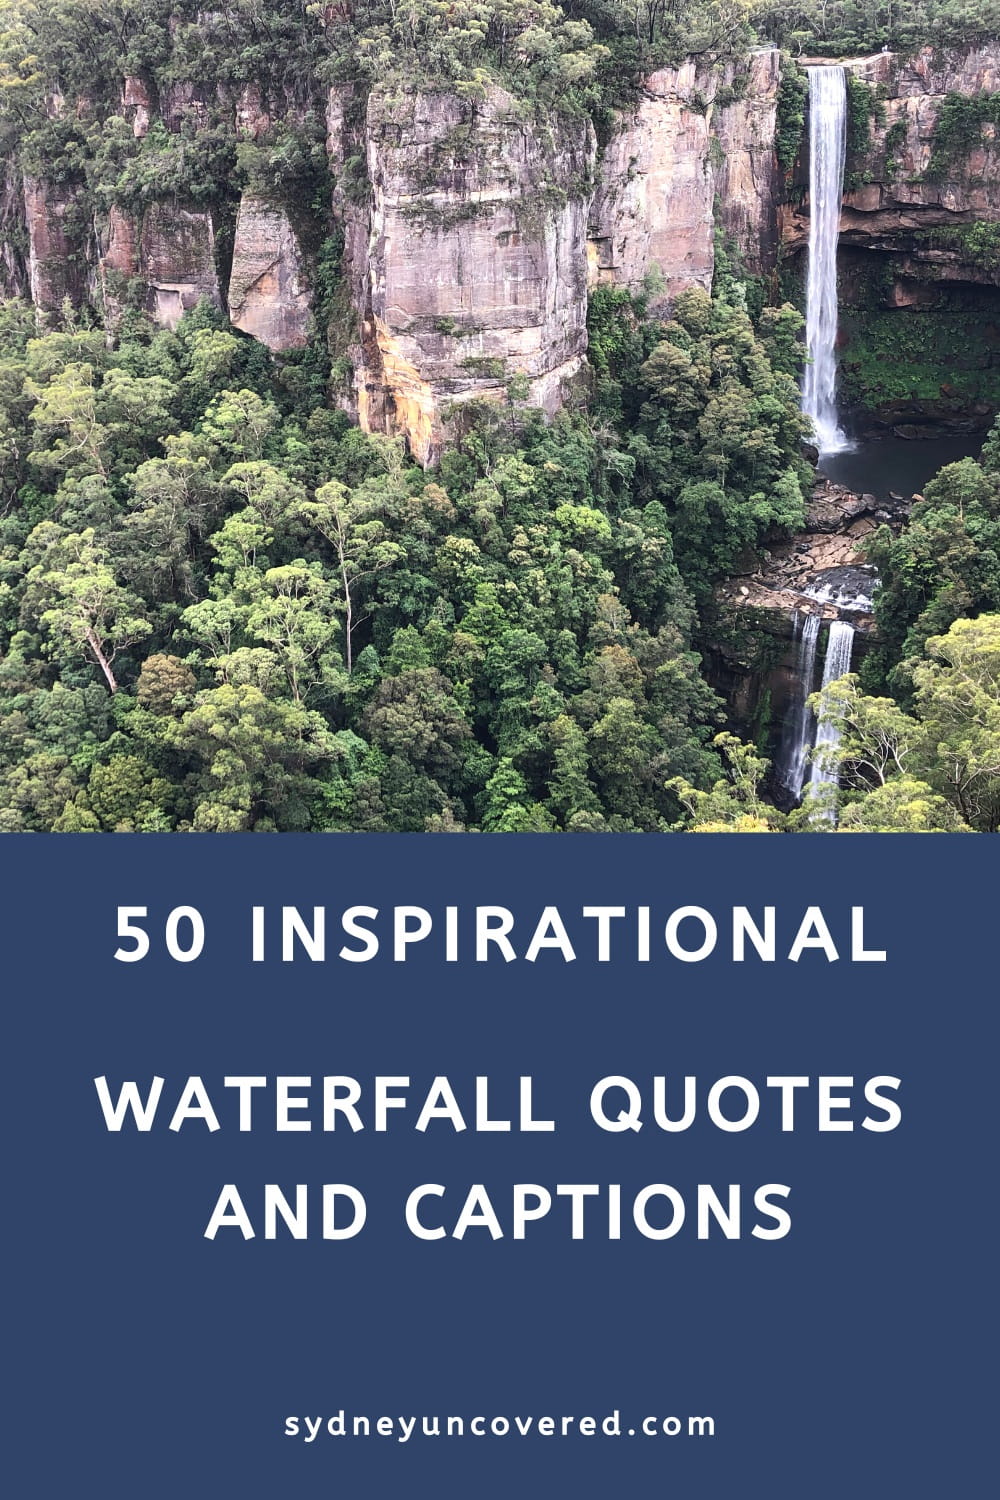 50 Inspirational waterfall quotes